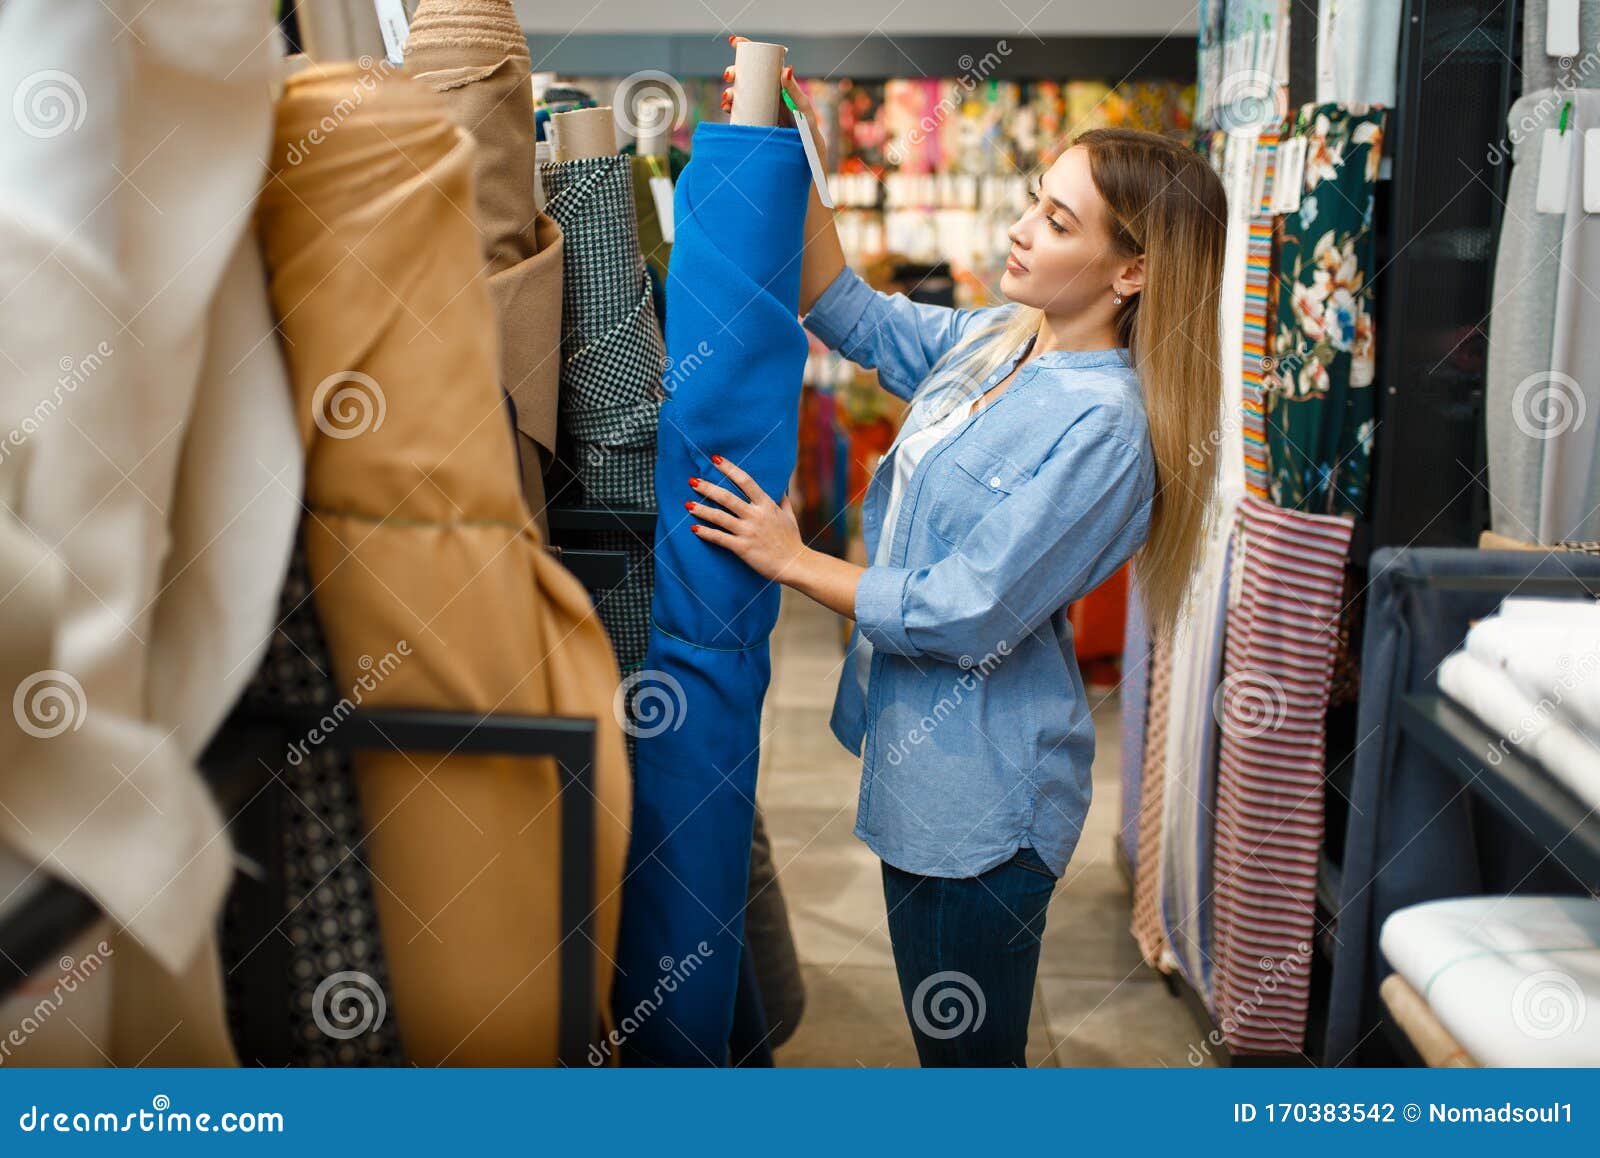 https://thumbs.dreamstime.com/z/seamstress-takes-fabric-roll-textile-workshop-woman-works-cloth-sewing-female-tailor-workplace-dressmaker-170383542.jpg